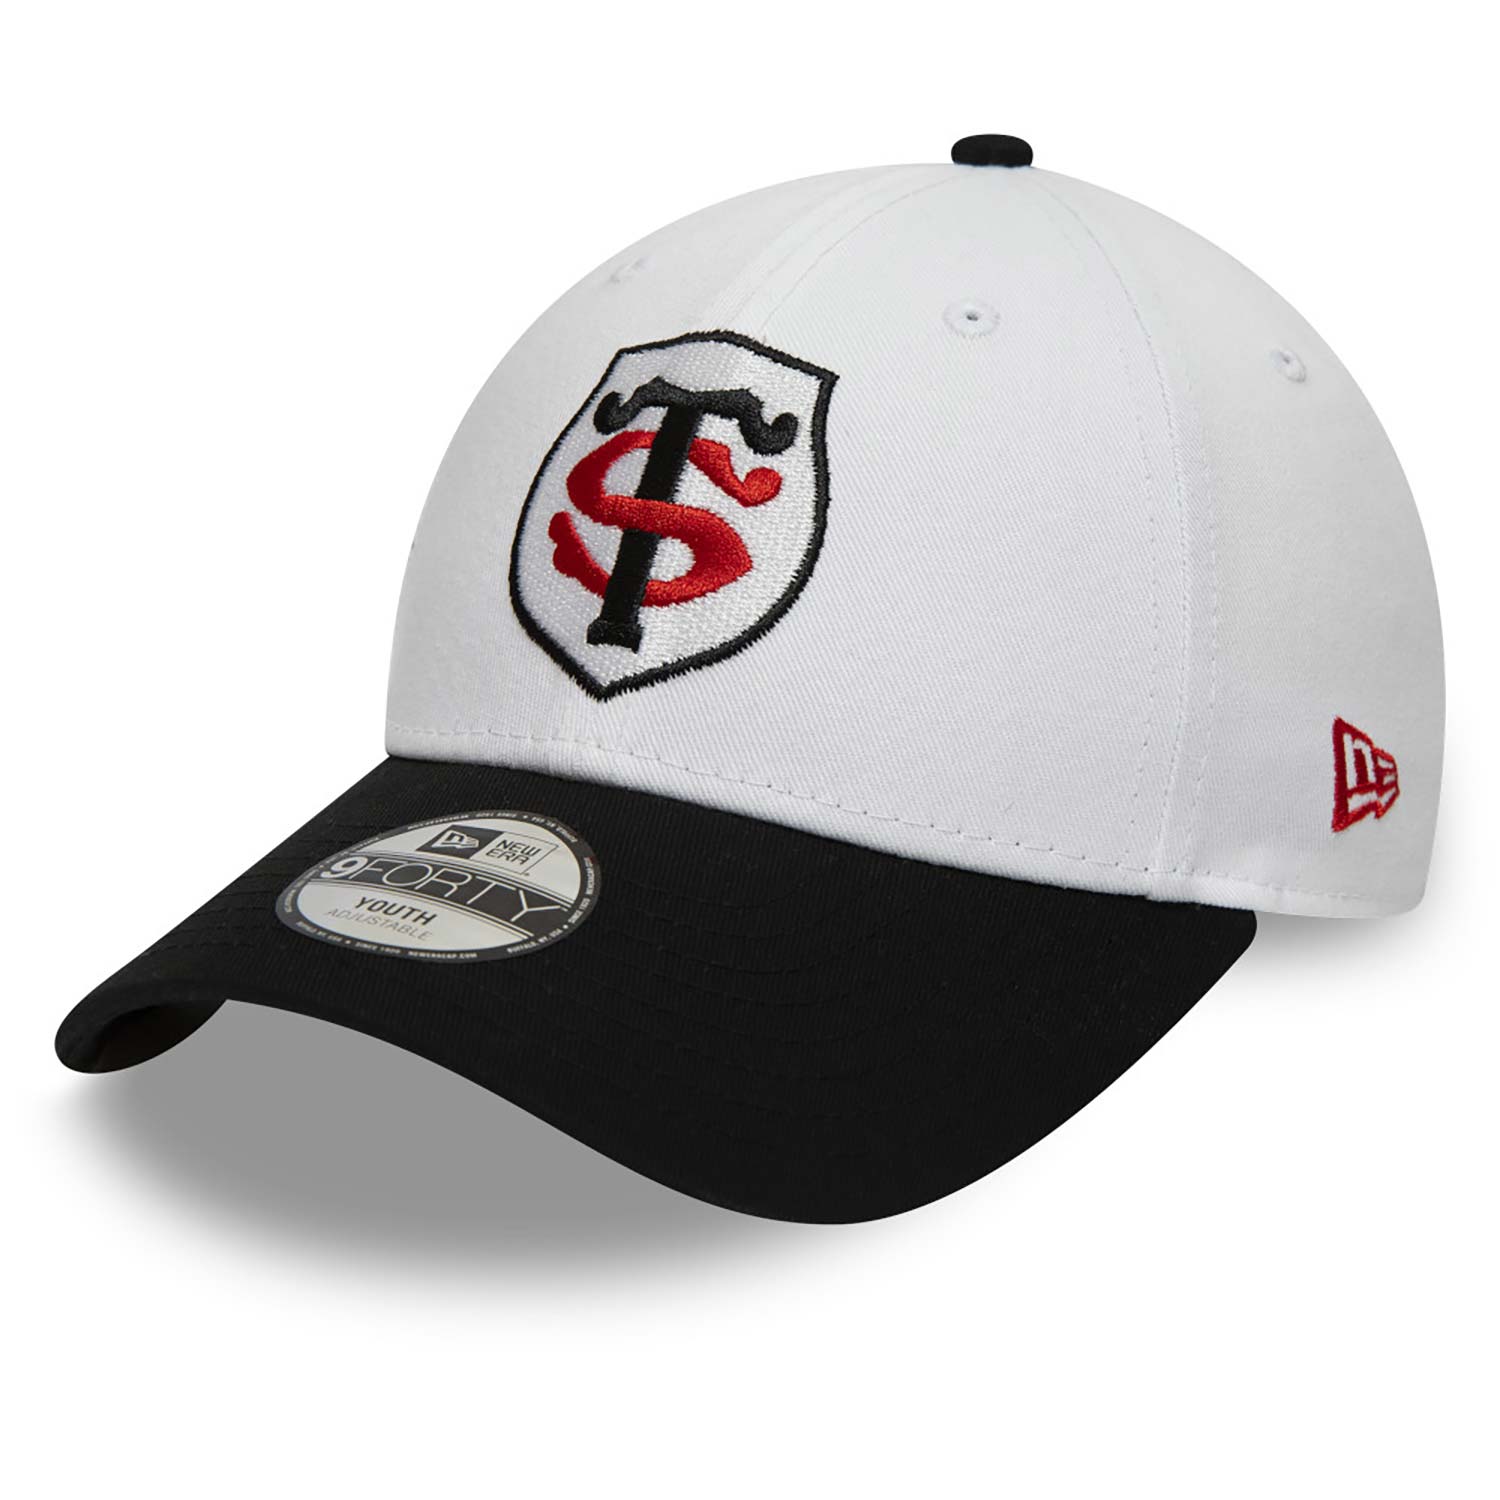 Stade Toulousain Two Tone White 9FORTY Youth Cap